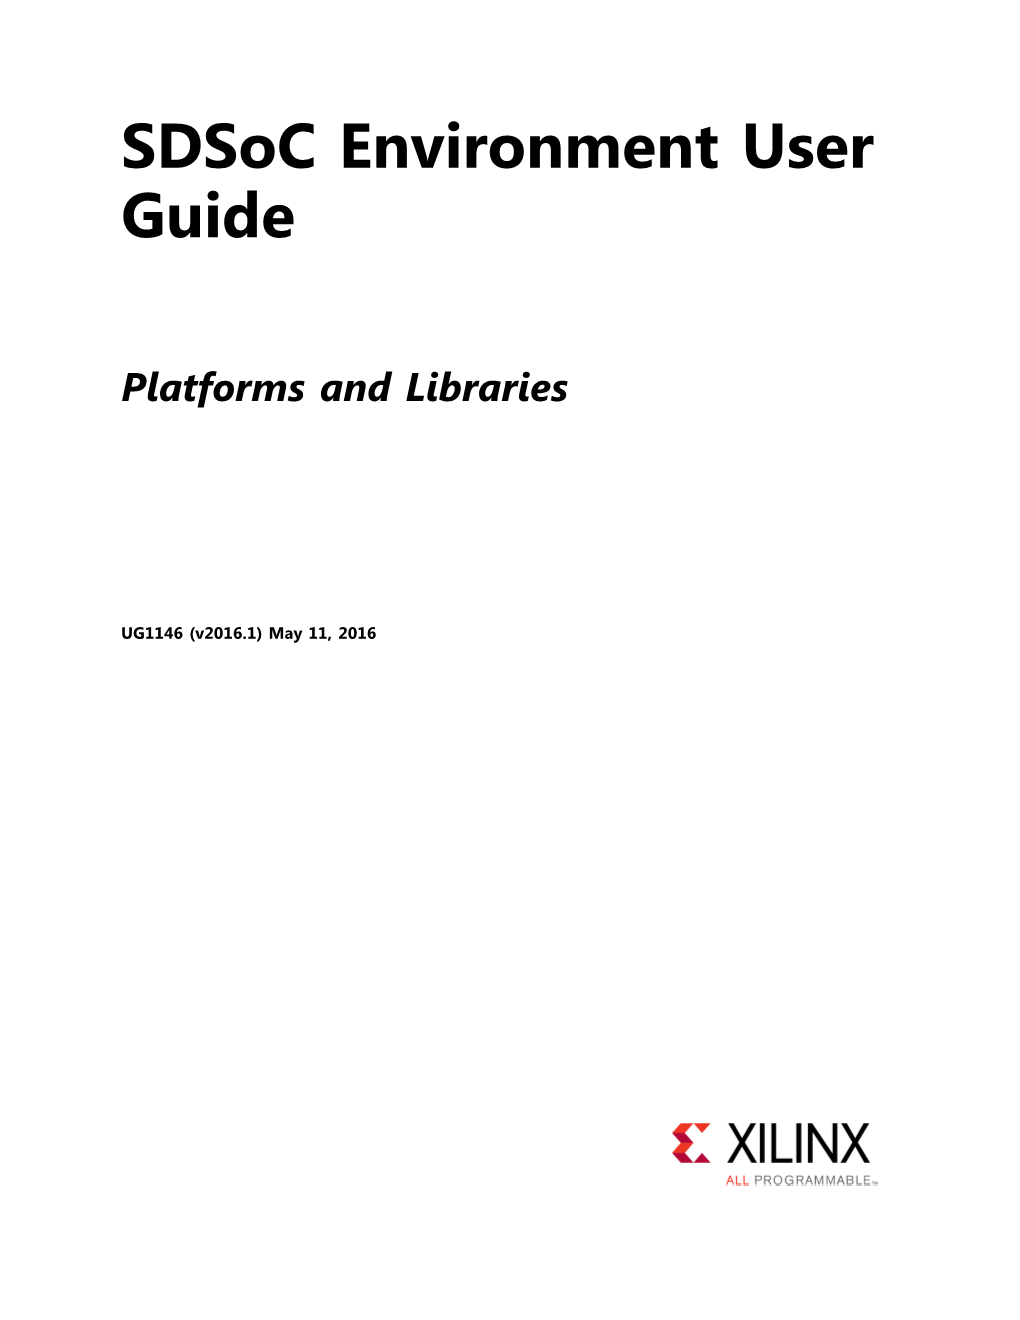 Sdsoc Environment User Guide: Platforms and Libraries (UG1146), Also Available in the Docs Folder of the Sdsoc Environment